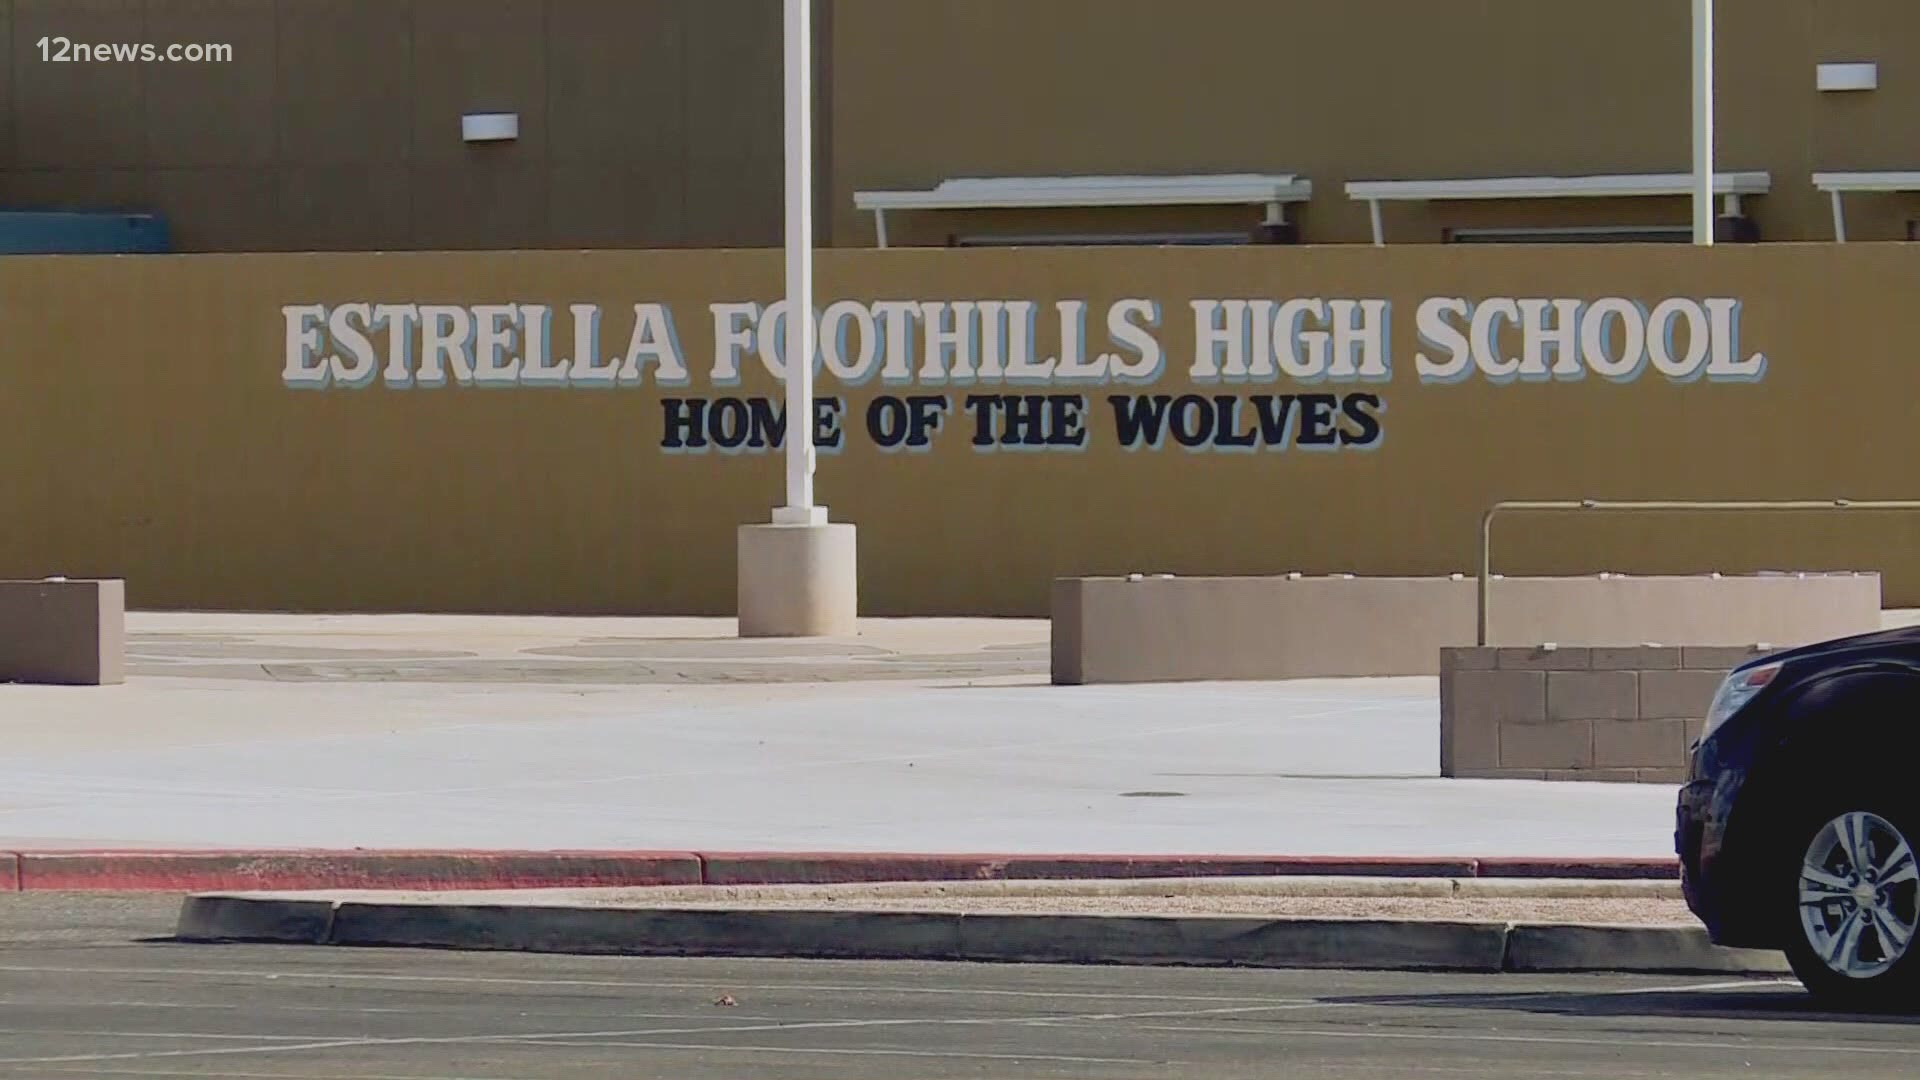 A student at Estrella Foothills High School brought a gun to campus and threatened to shoot themself. Another student disarmed them before anyone got hurt.